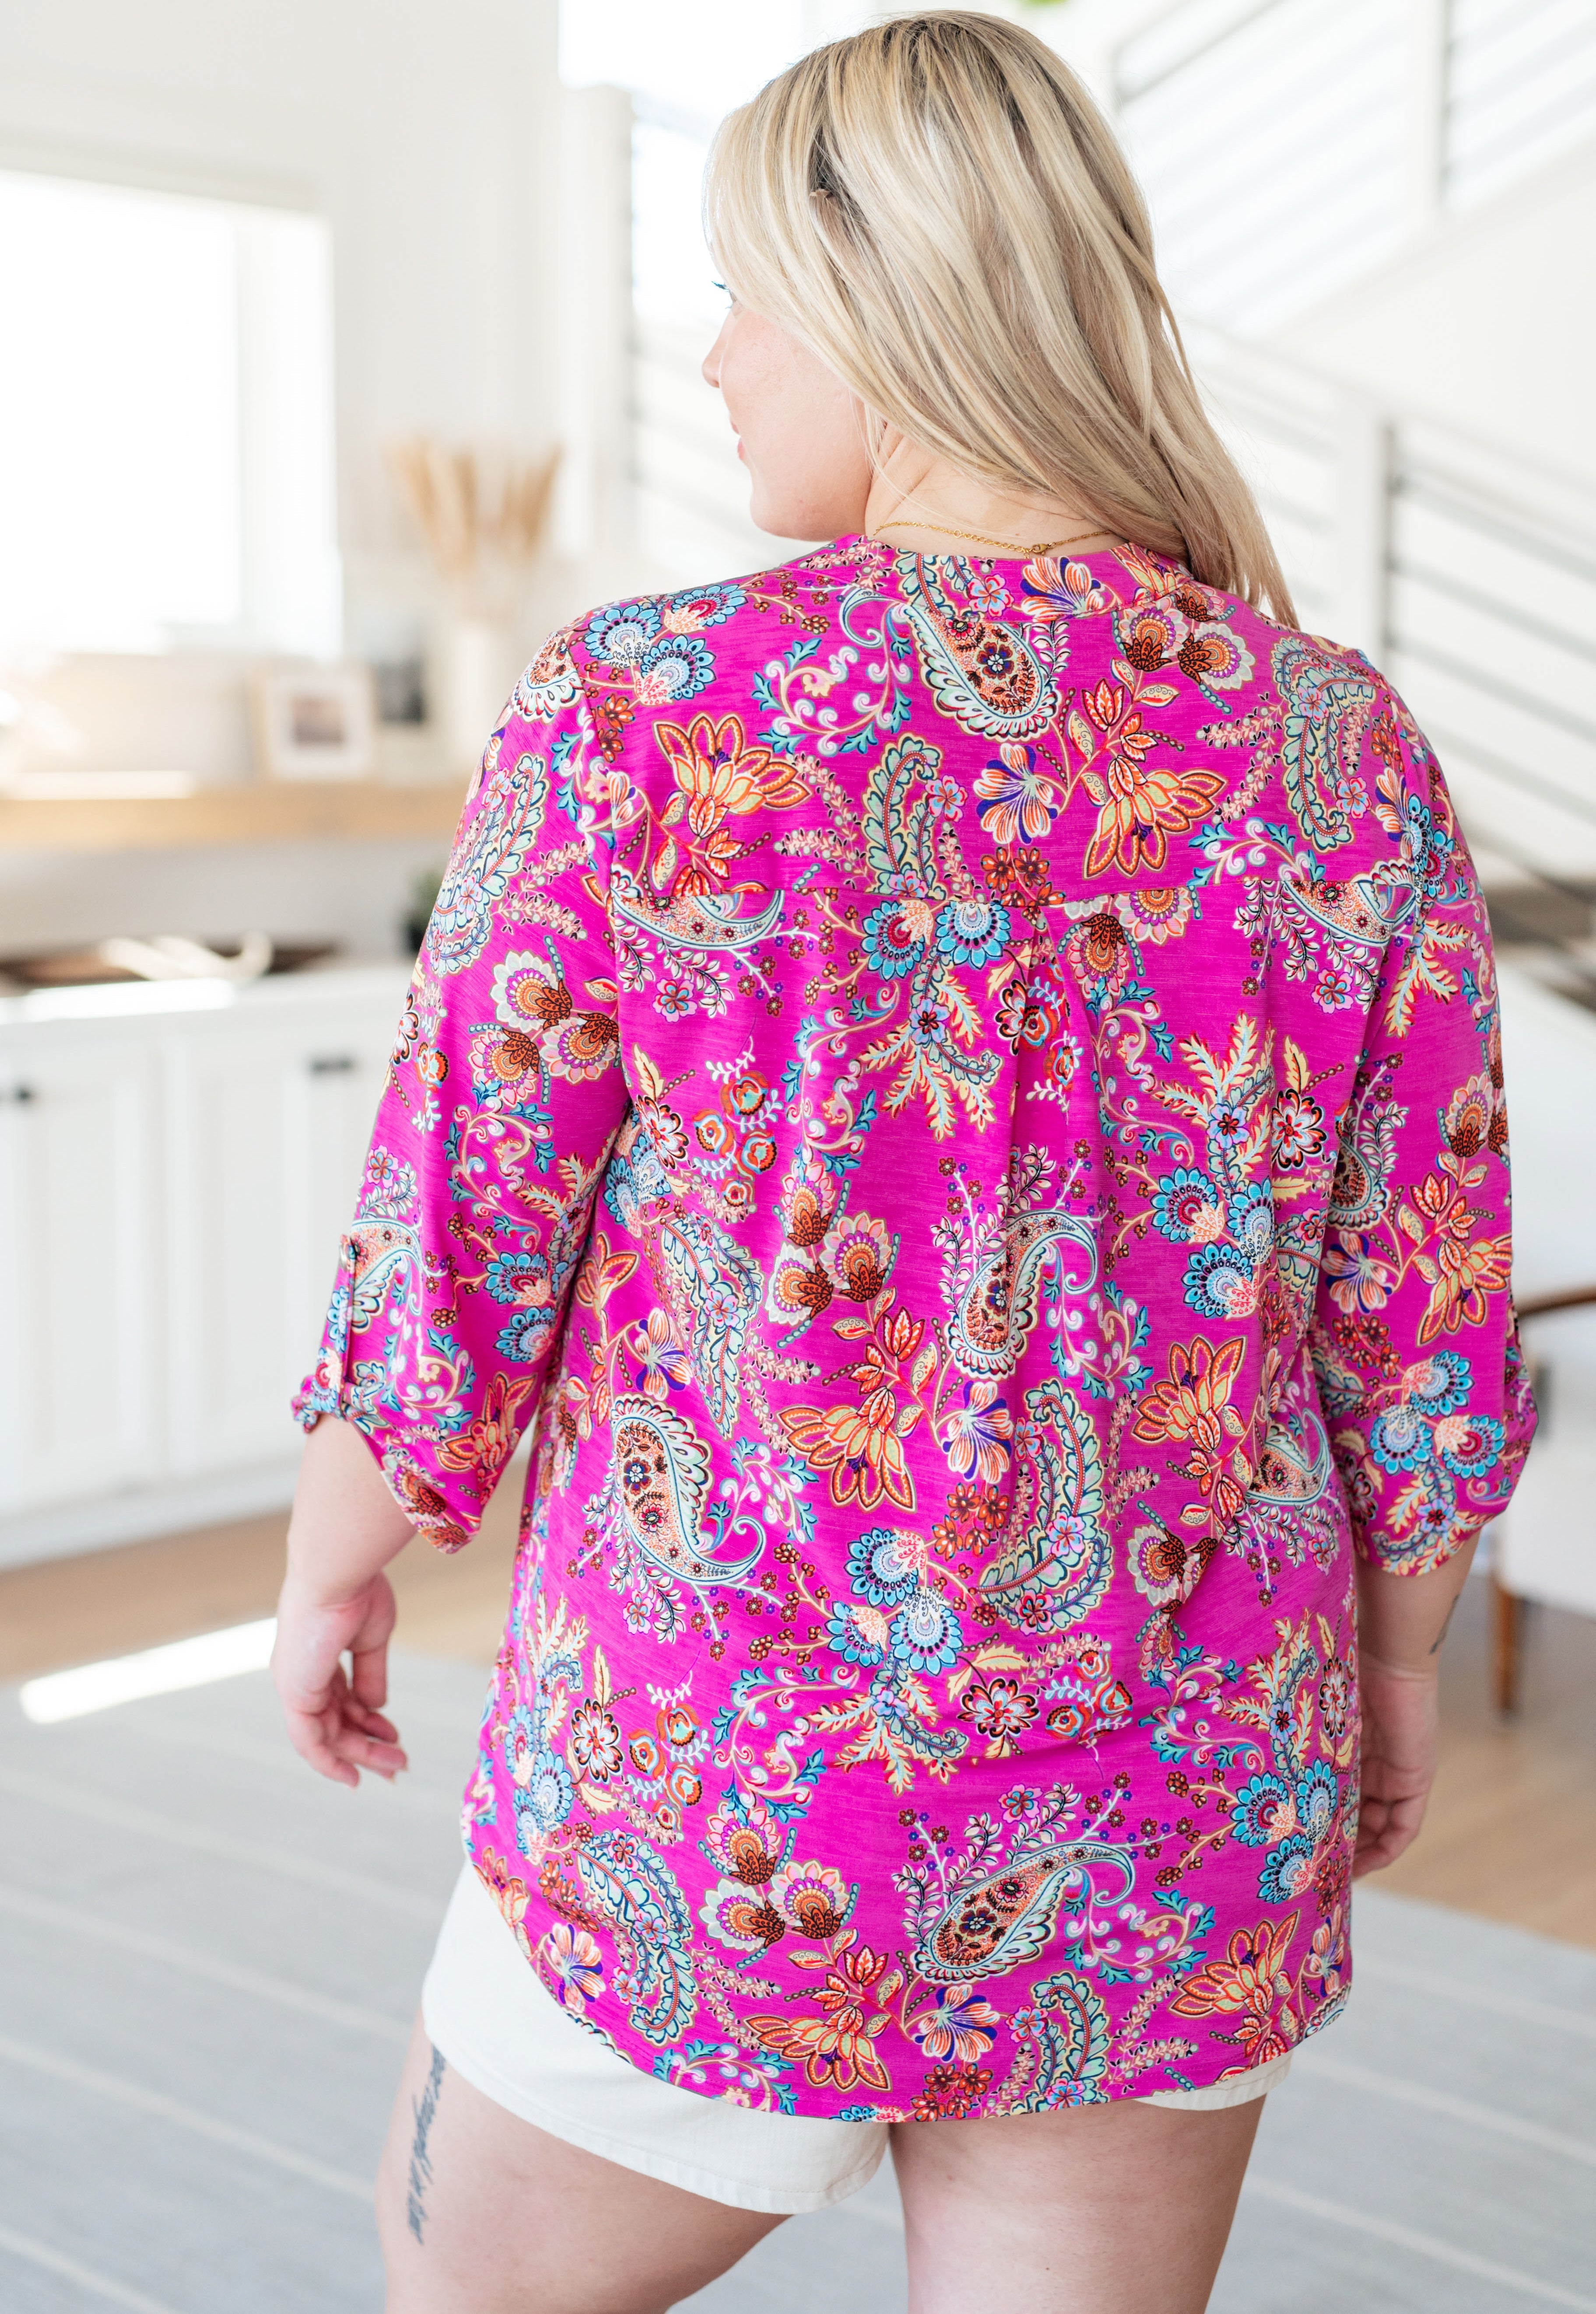 Lizzy Top in Magenta Floral Paisley Tops Ave Shops   